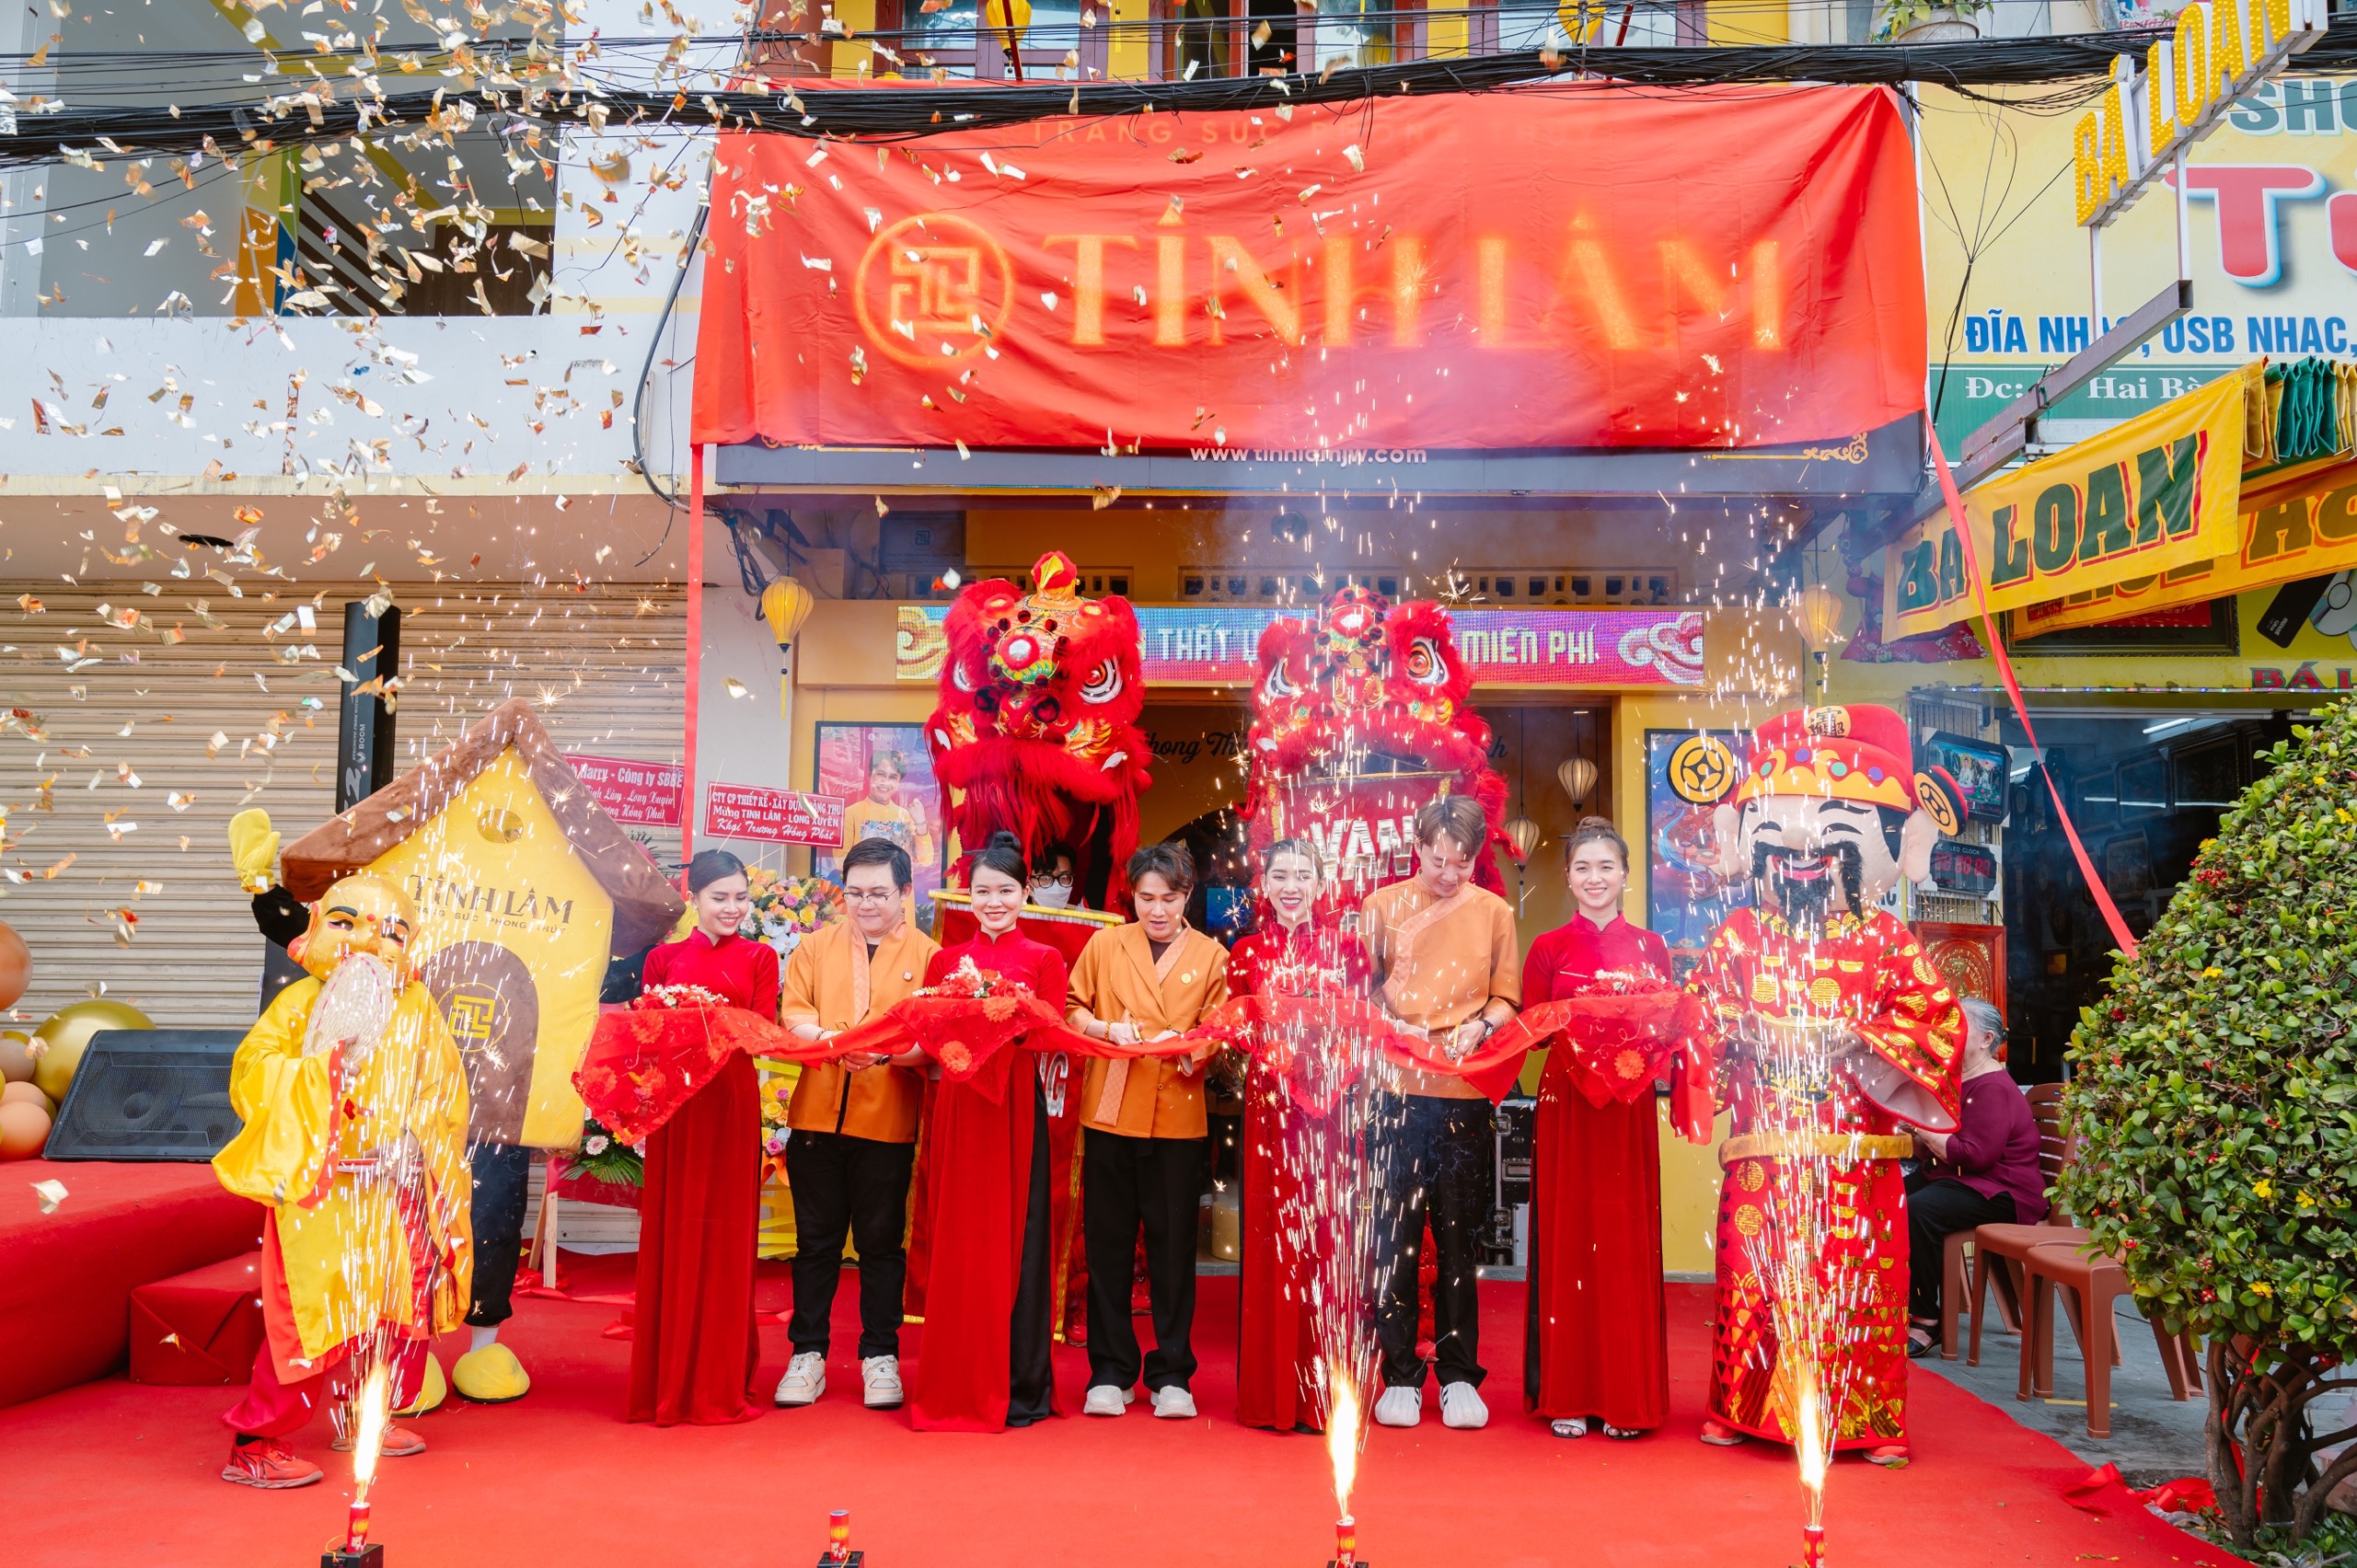 Decorations and Chinese dragons for celebrating Chinese New Year